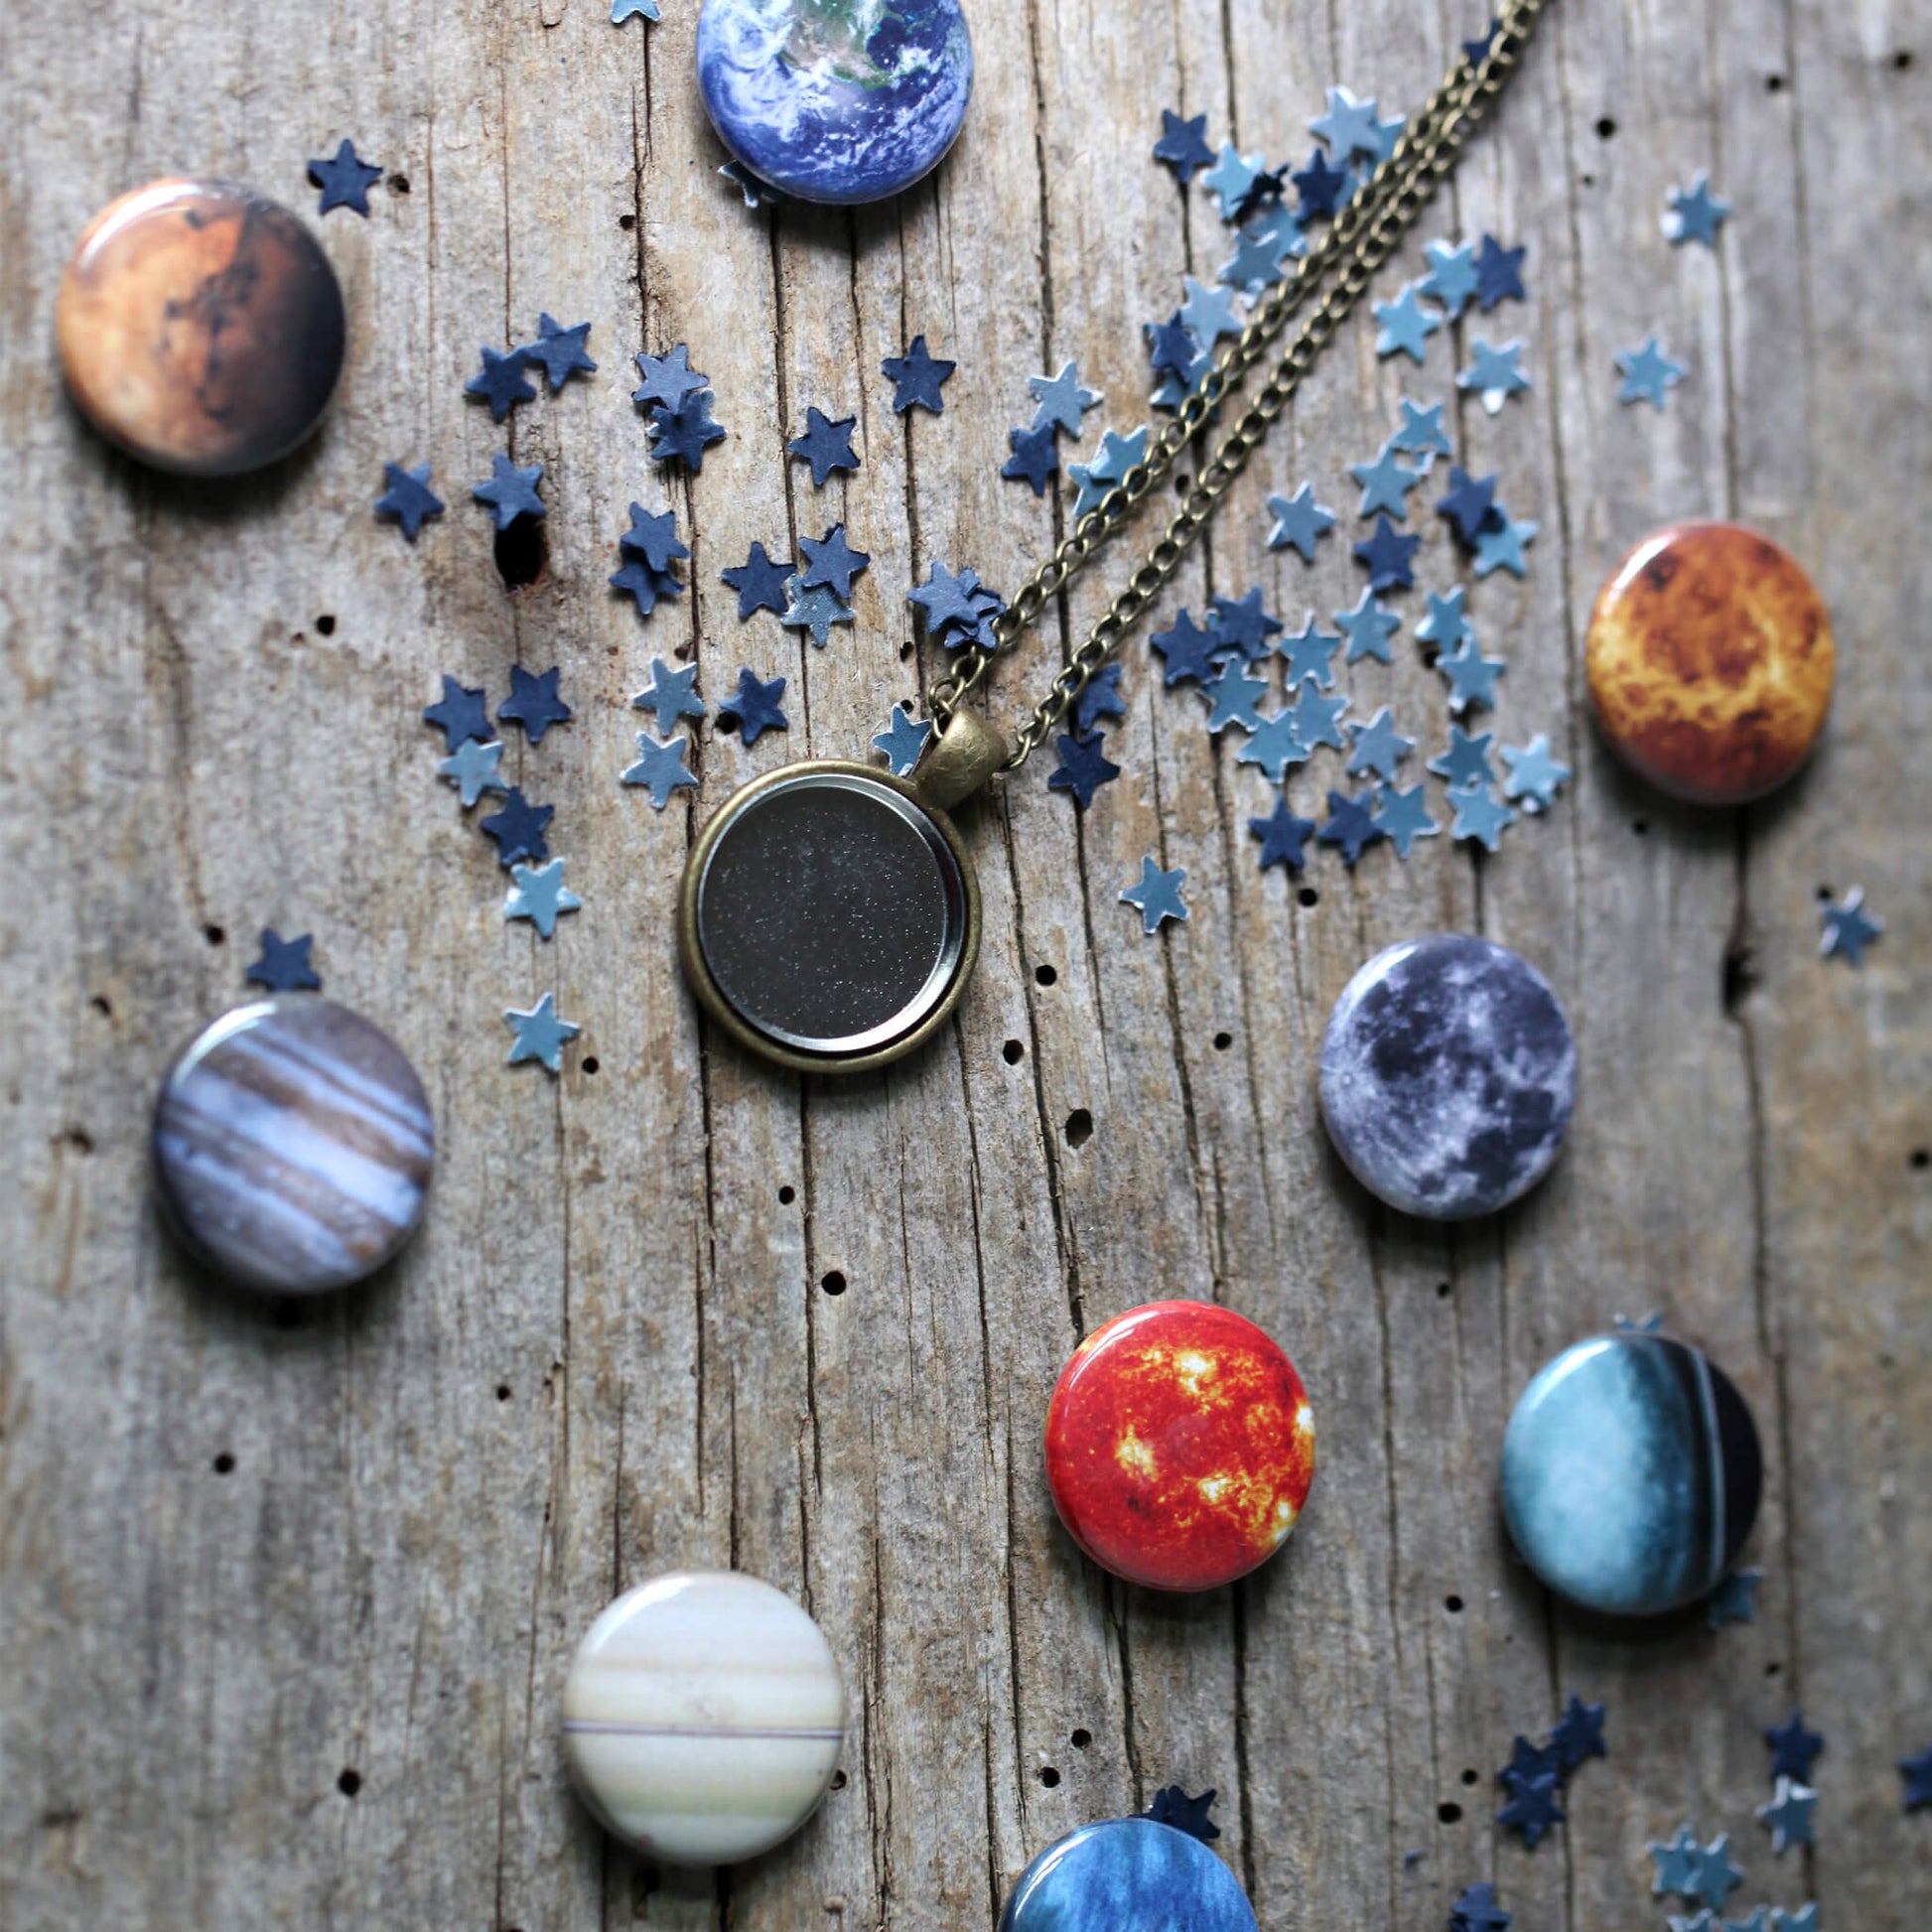 Solar System Images for Interchangeable Jewelry - Magnets Only!